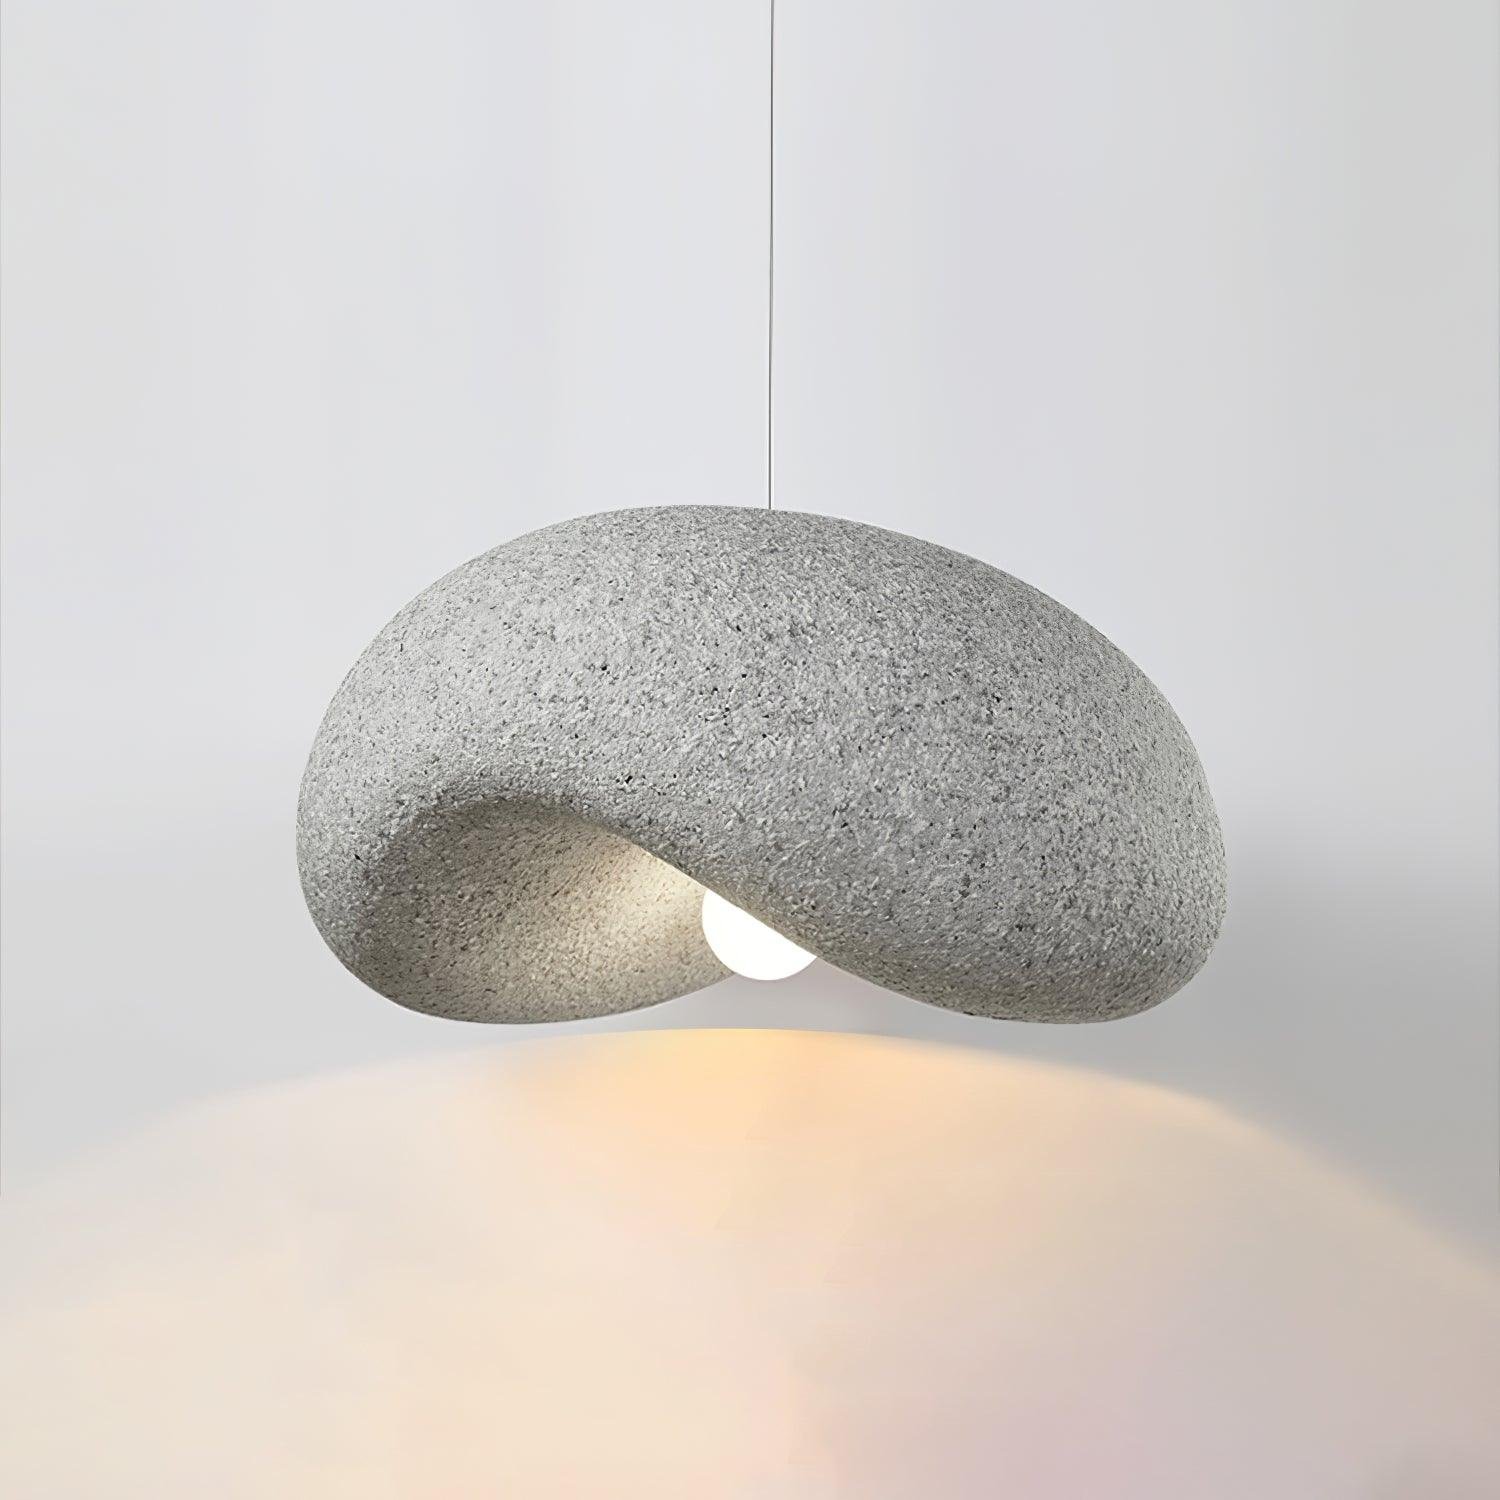 Dunia Speckled Pendant Lamp in Light Gray, measuring 23.6" in diameter and 9.8" in height (60cm x 25cm).